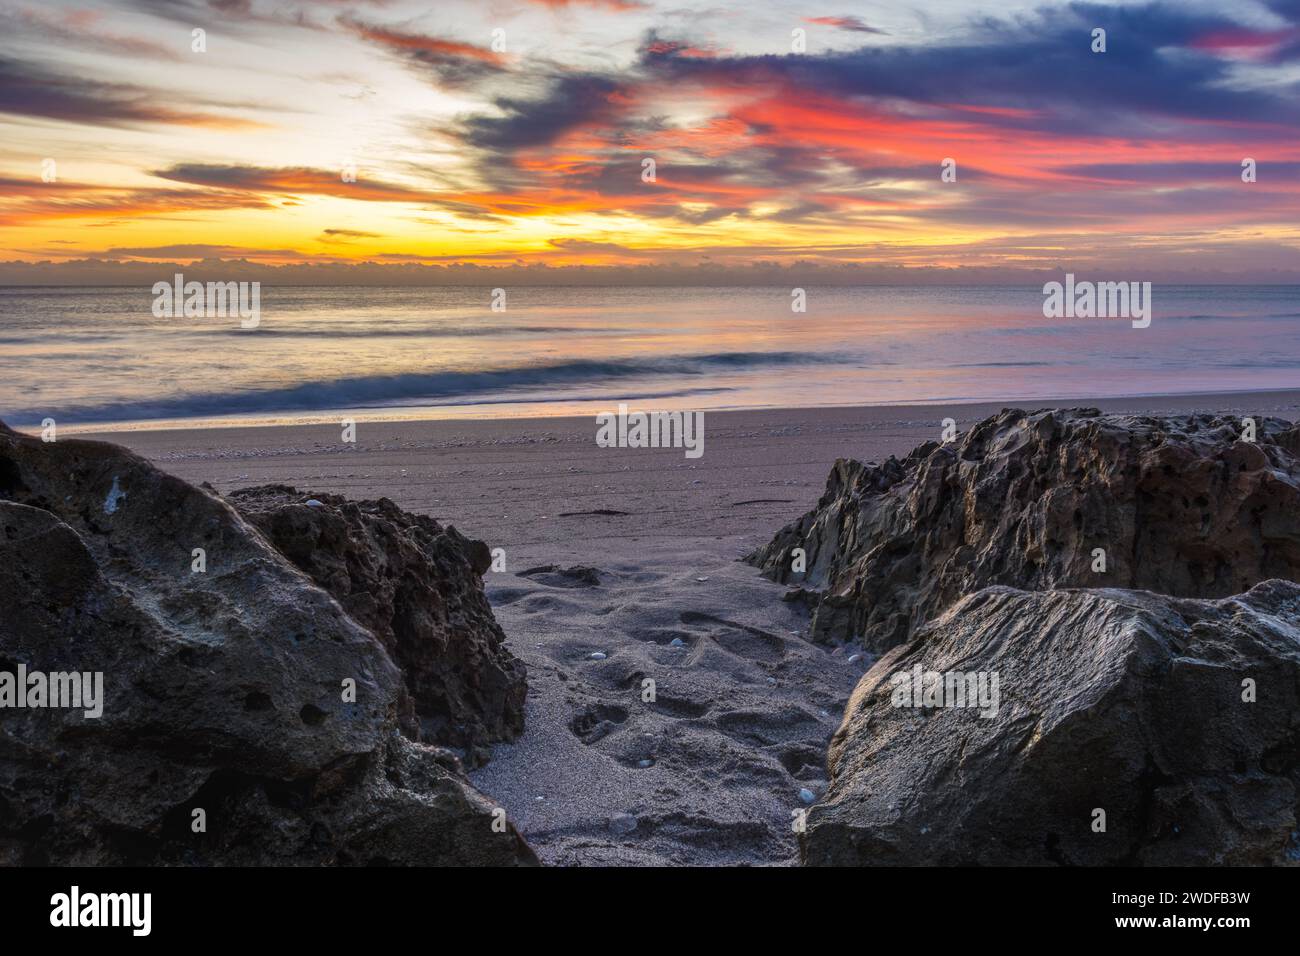 Vibrant beach sunrise with striking clouds and rocky foreground, perfect for marketing campaigns, travel blogs, and artistic inspiration. Stock Photo